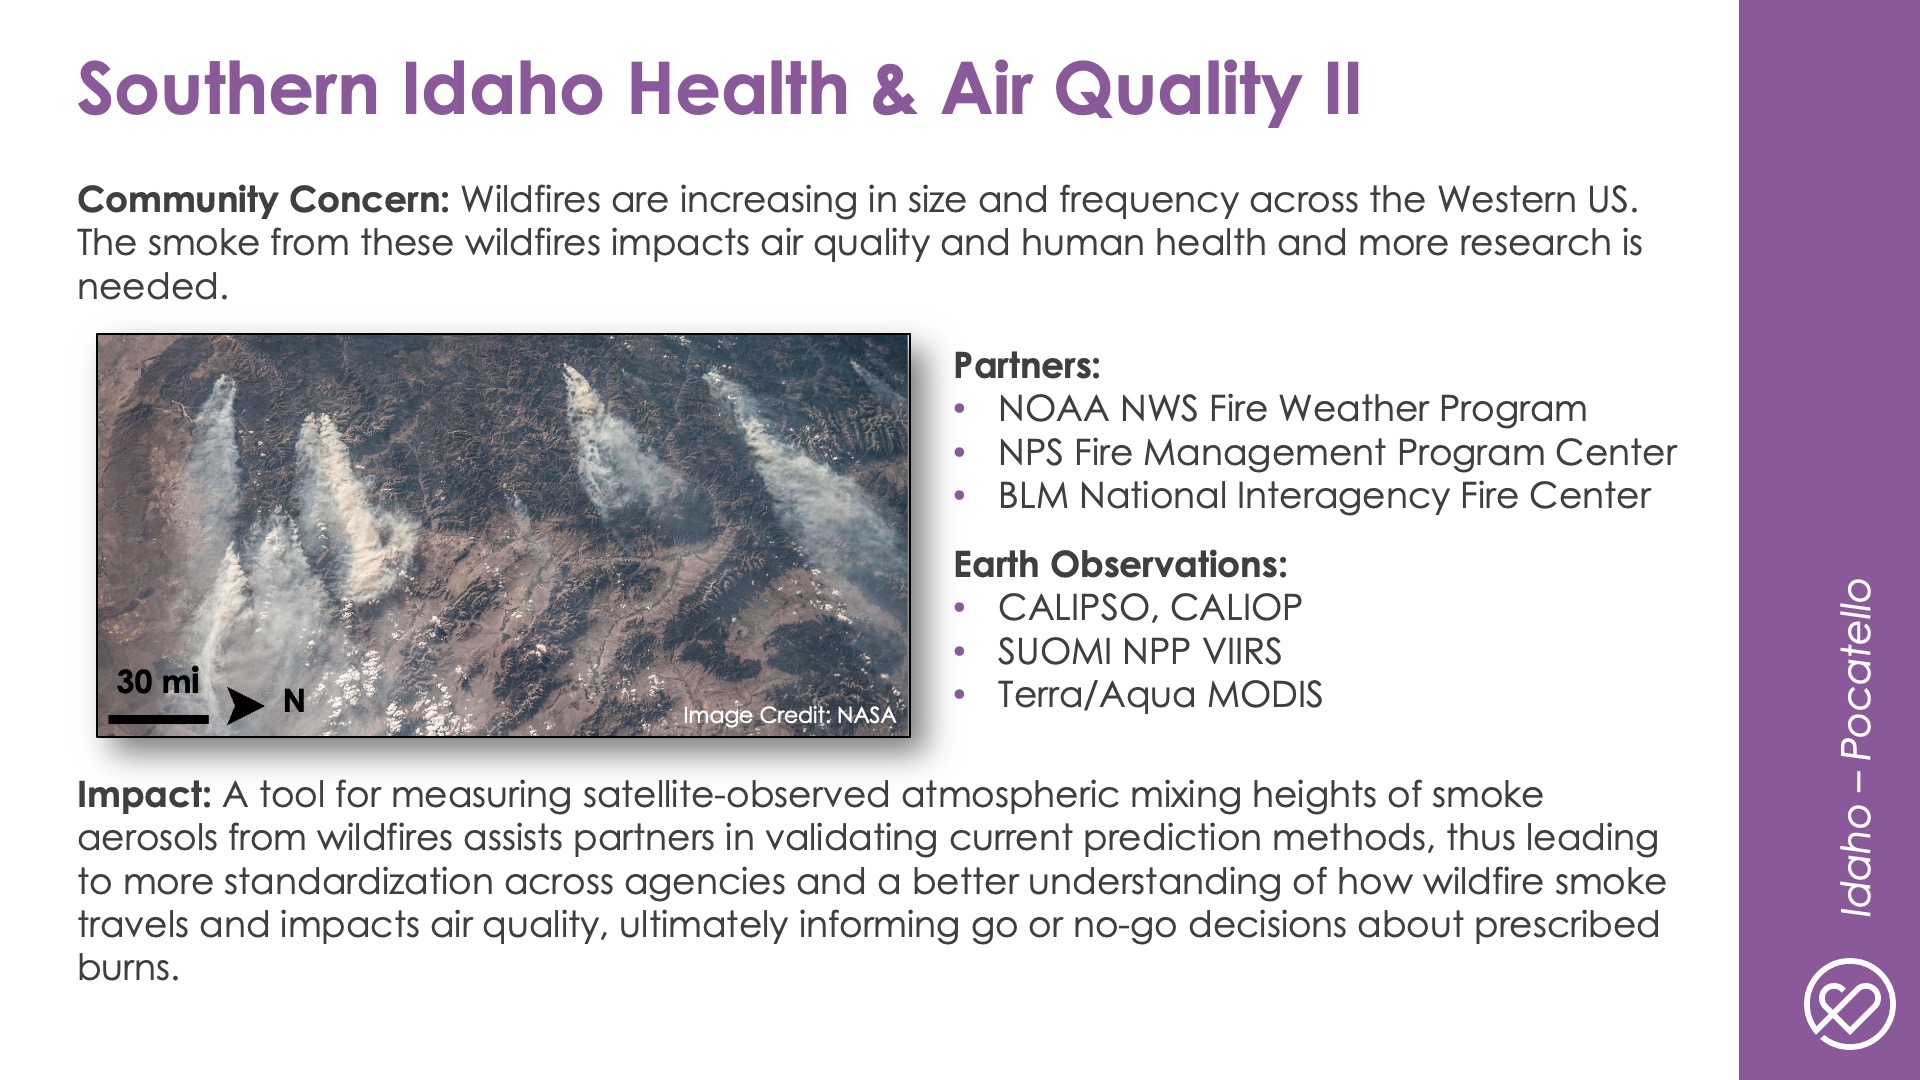 Slide title: Southern Idaho Health & Air Quality IIDEVELOP Node: Idaho - PocatelloCommunity Concern: Wildfires are increasing in size and frequency across the Western US. The smoke from these wildfires impacts air quality and human health and more research is needed.Impact: A tool for measuring satellite-observed atmospheric mixing heights of smoke aerosols from wildfires assists partners in validating current prediction methods, thus leading to more standardization across agencies and a better understanding of how wildfire smoke travels and impacts air quality, ultimately informing go or no-go decisions about prescribed burns.Partners: NOAA NWS Fire Weather Program, NPS Fire Management Program Center, BLM National Interagency Fire CenterEarth Observations: CALIPSO, CALIOP, SUOMI NPP VIIRS, Terra/Aqua MODIS